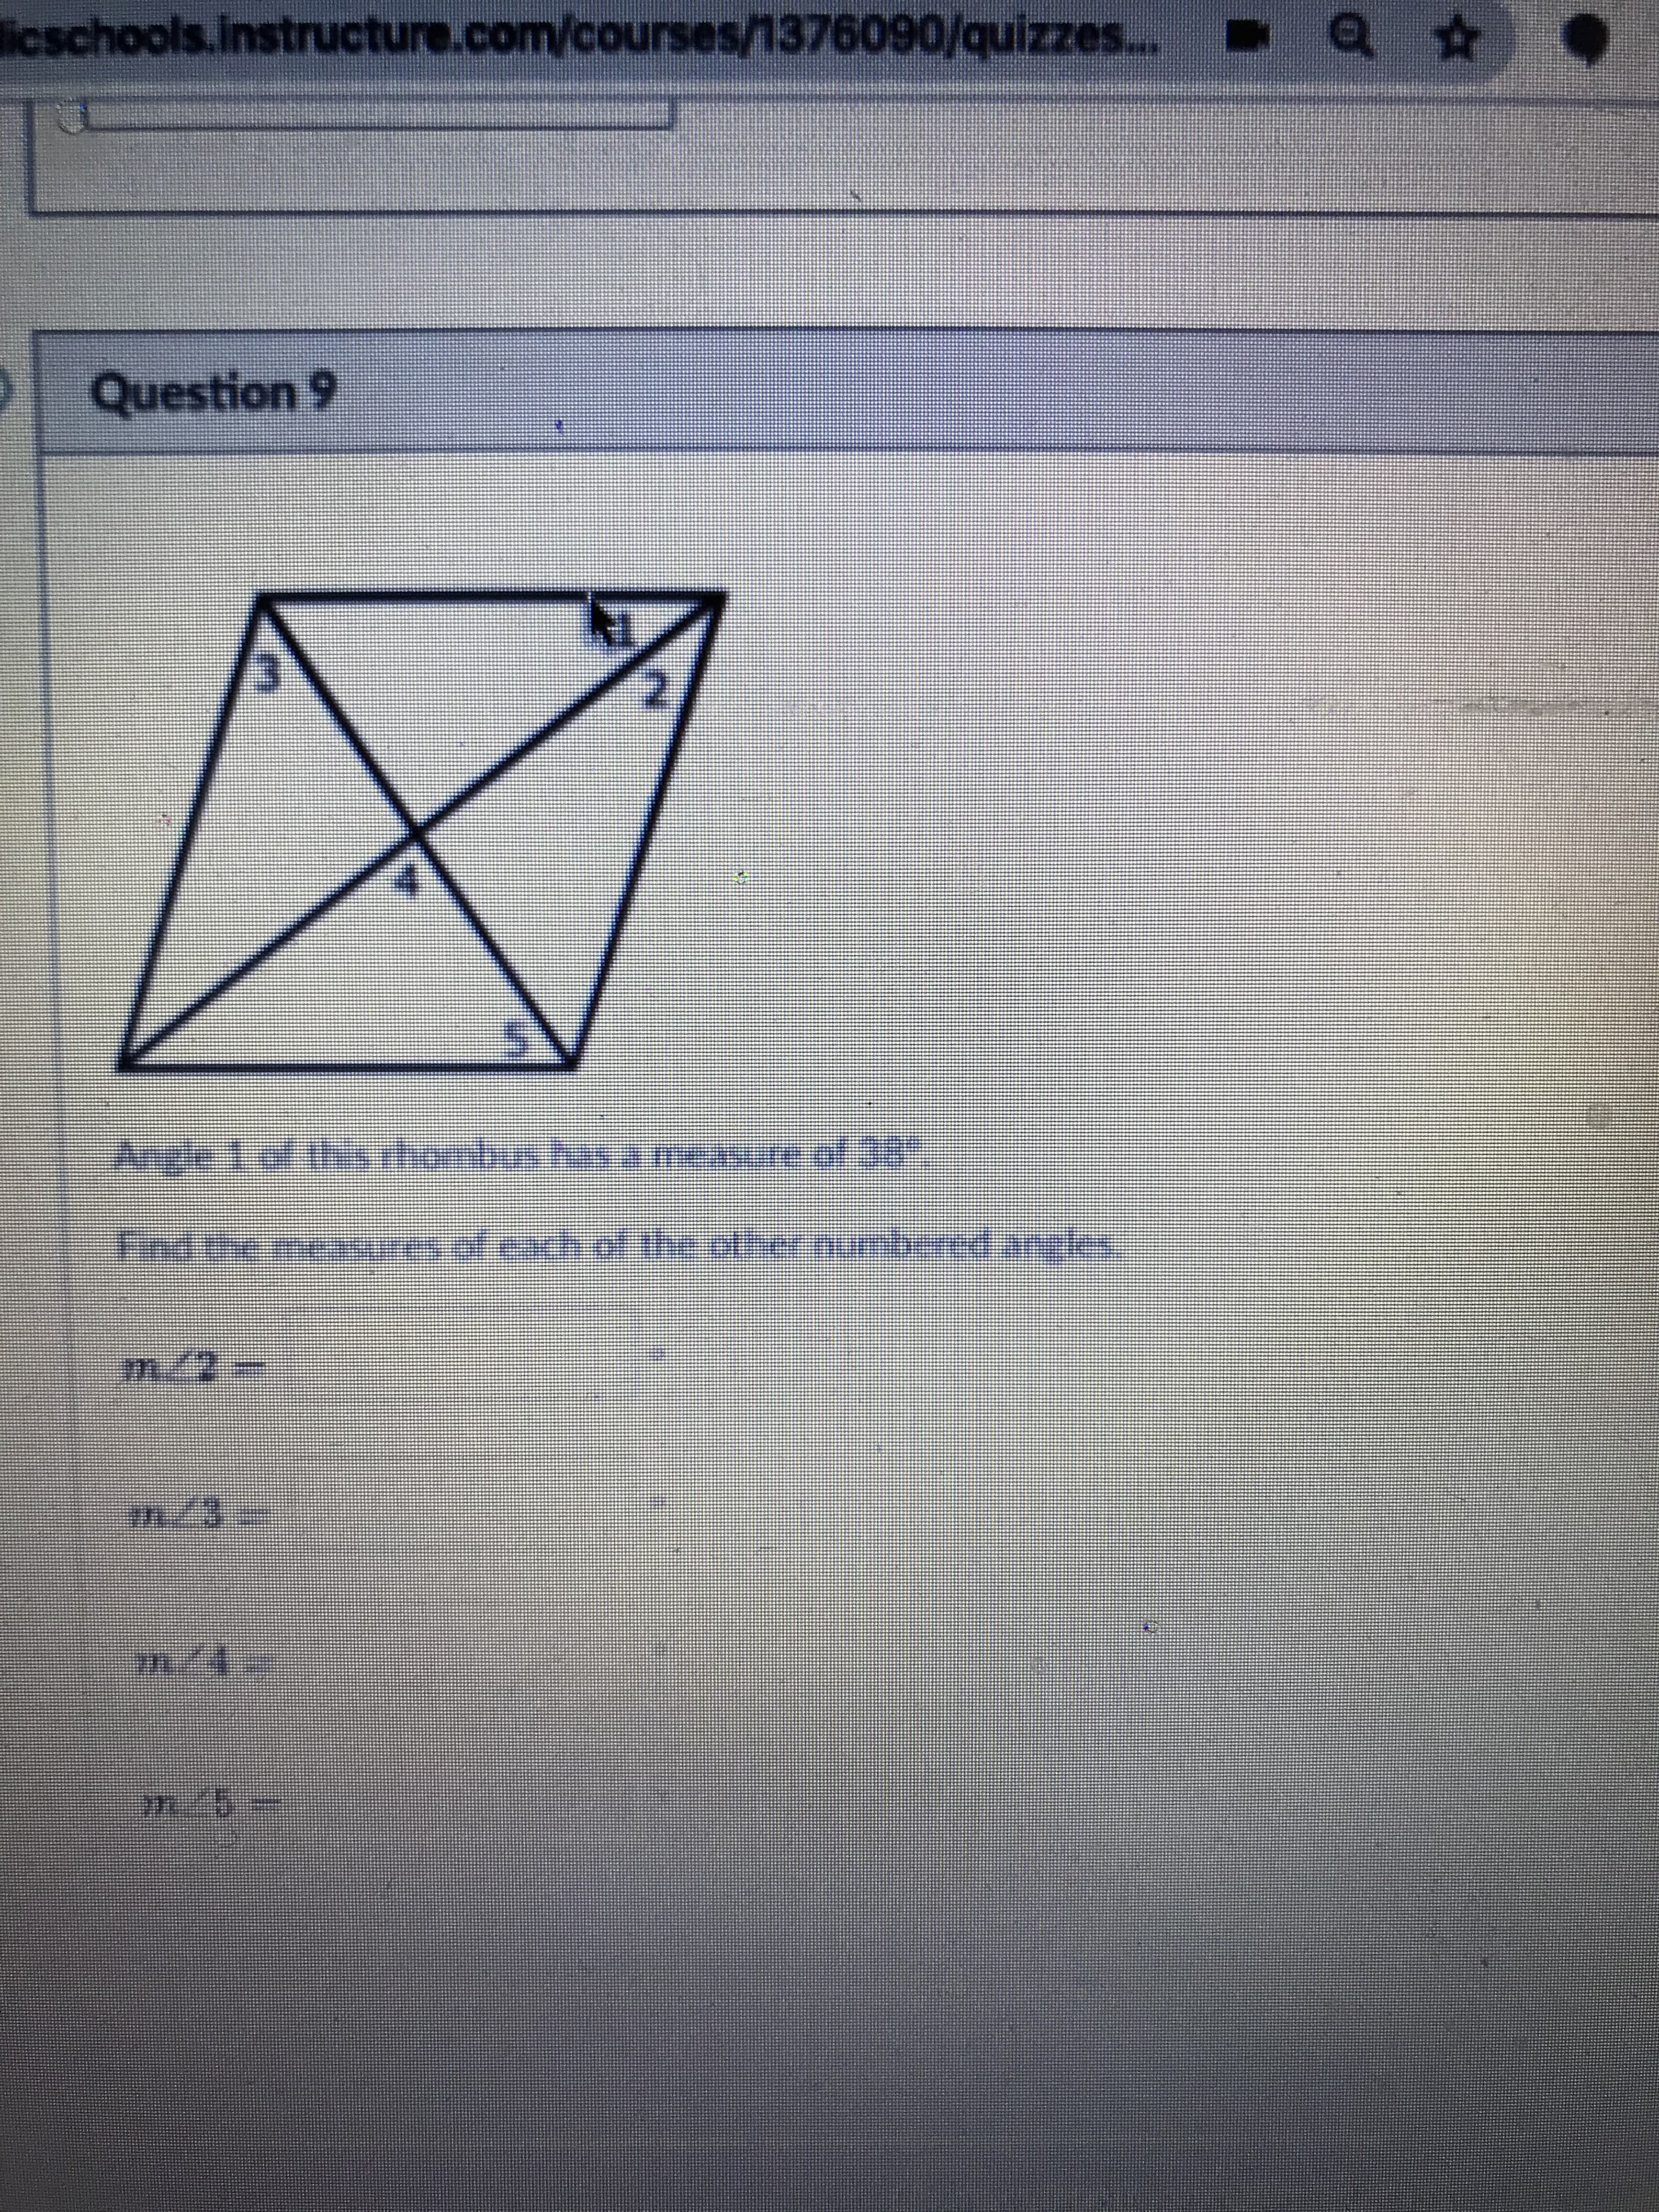 licschools.Instructure.com/courses/1376090/quizzes...
of
Question 9
Find ee meases of each of the other numbered angles
